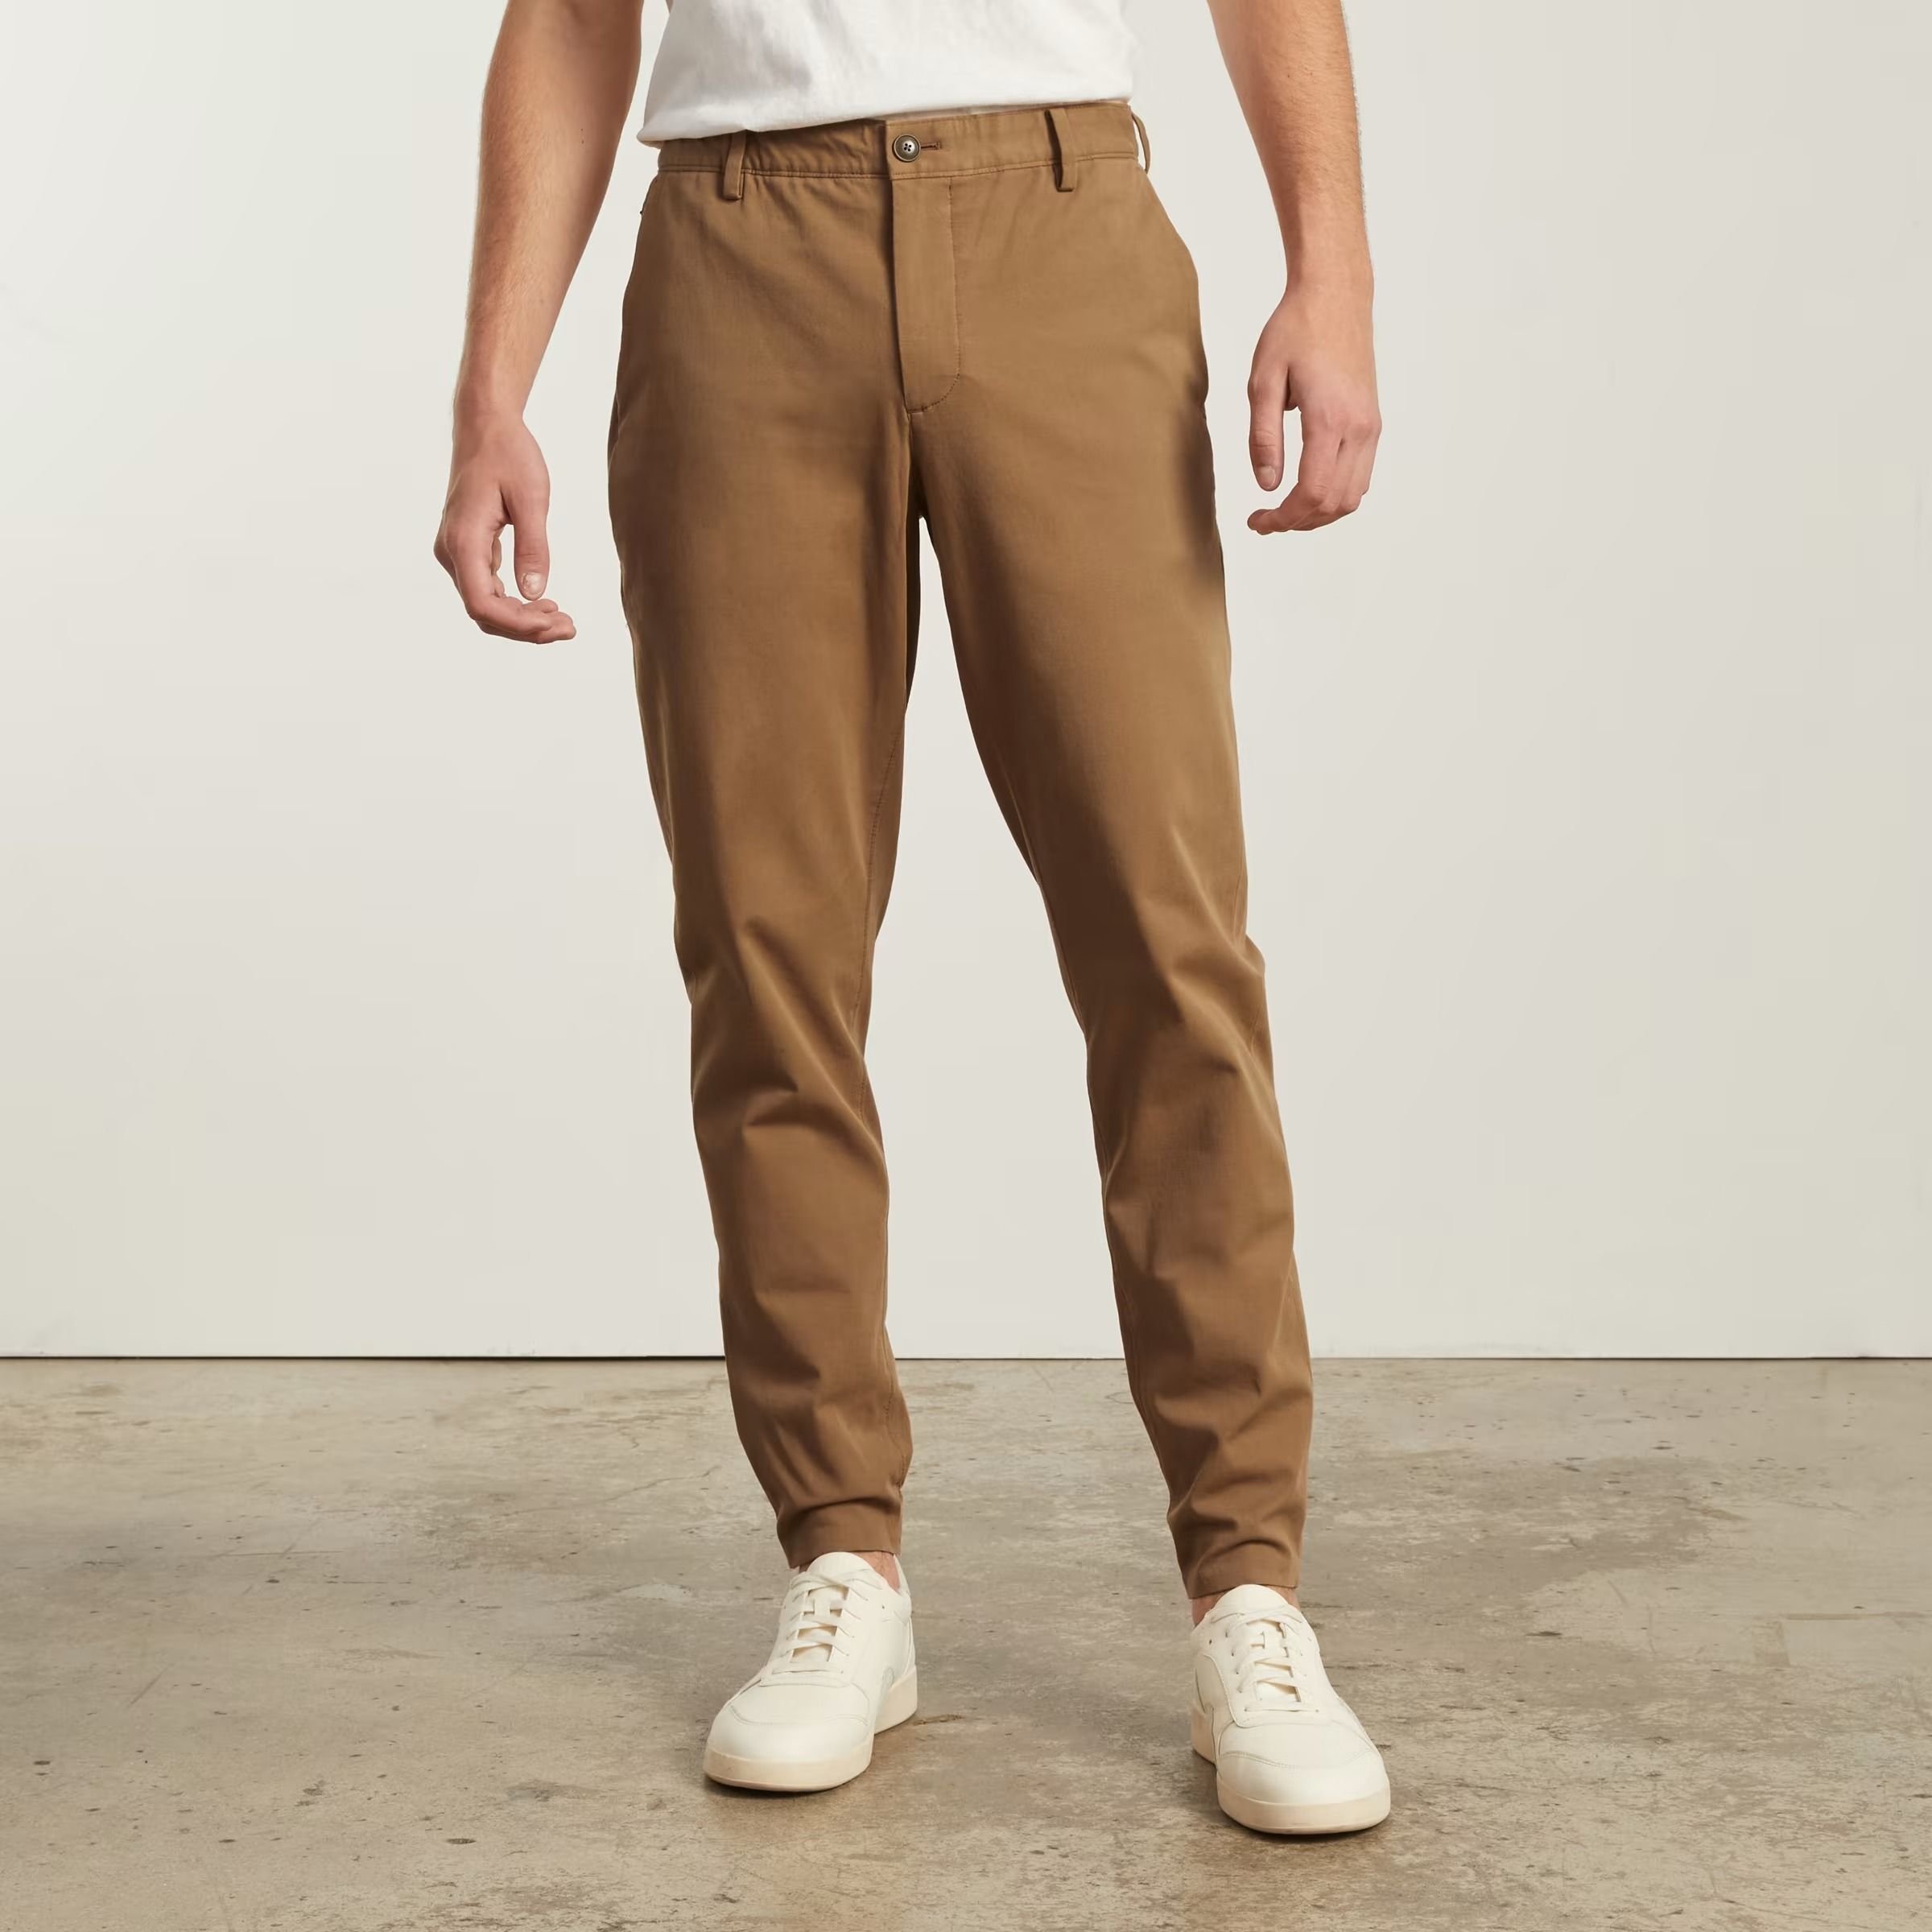 Men's key items to aim for as summer clothes in 2022, picked by category! |  Men's Fashion Media OTOKOMAE